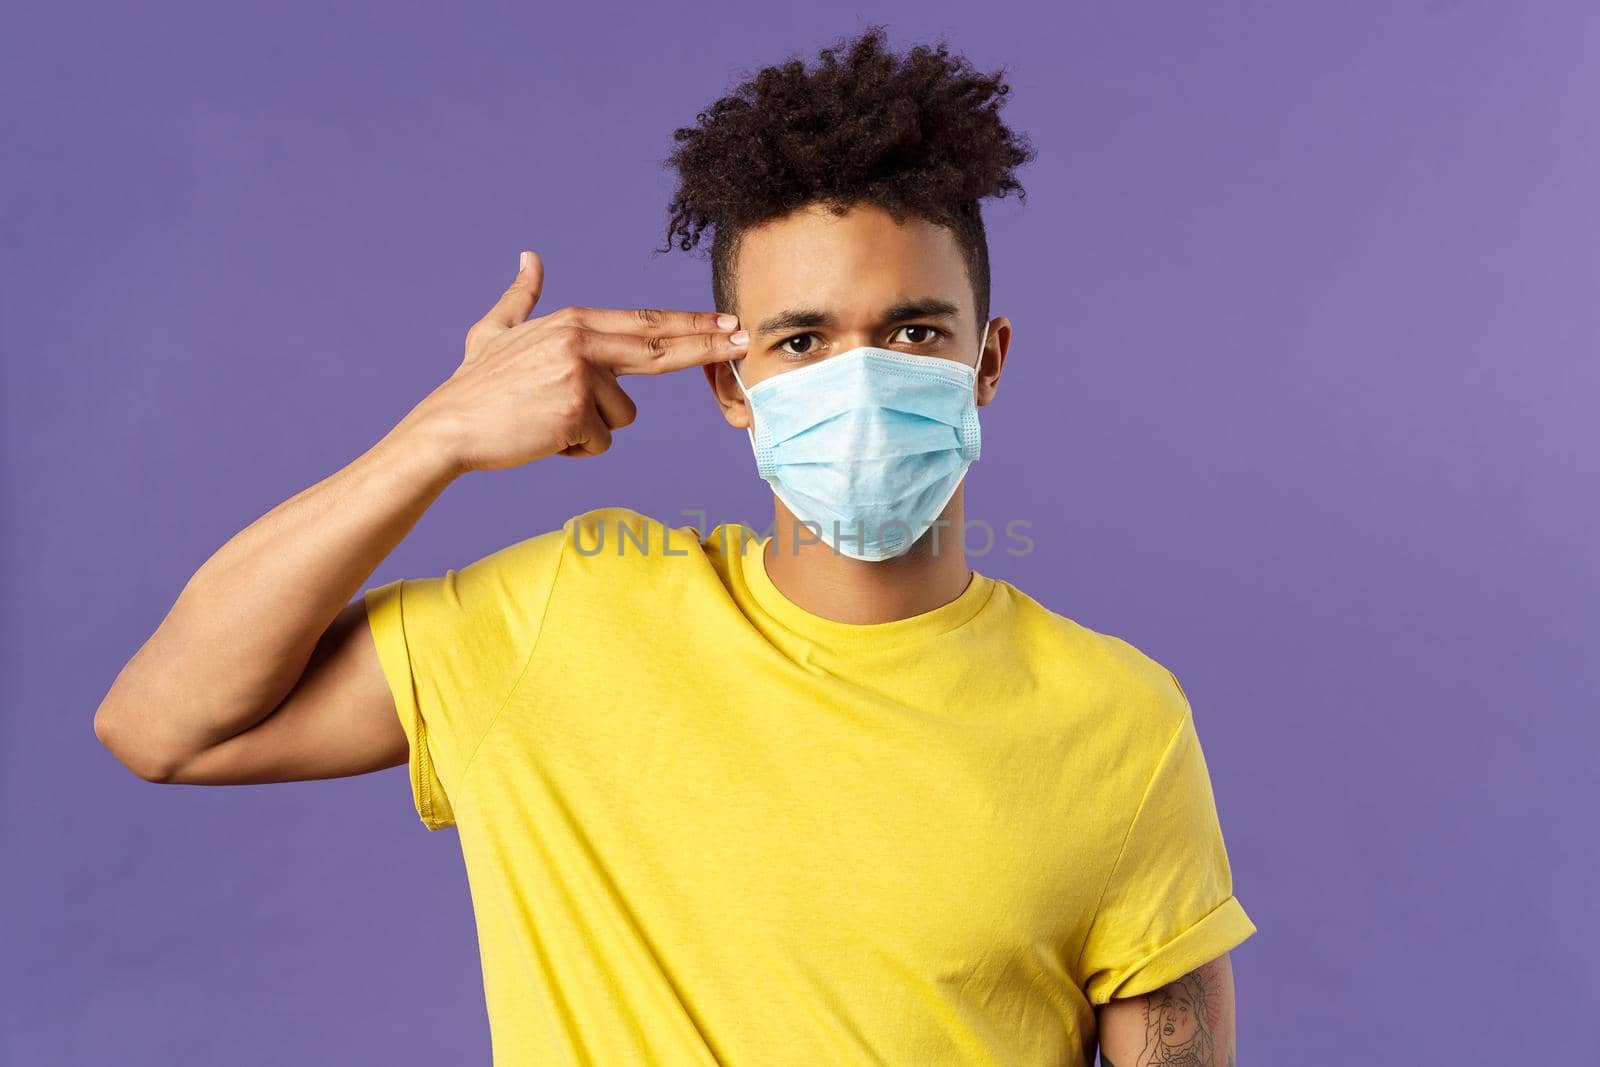 Covid19, healtcare and medicine concept. Close-up portrait of serious hispanic guy in medical mask, showing gun near head as if sick and tired of people not avoid social contact, purple background.